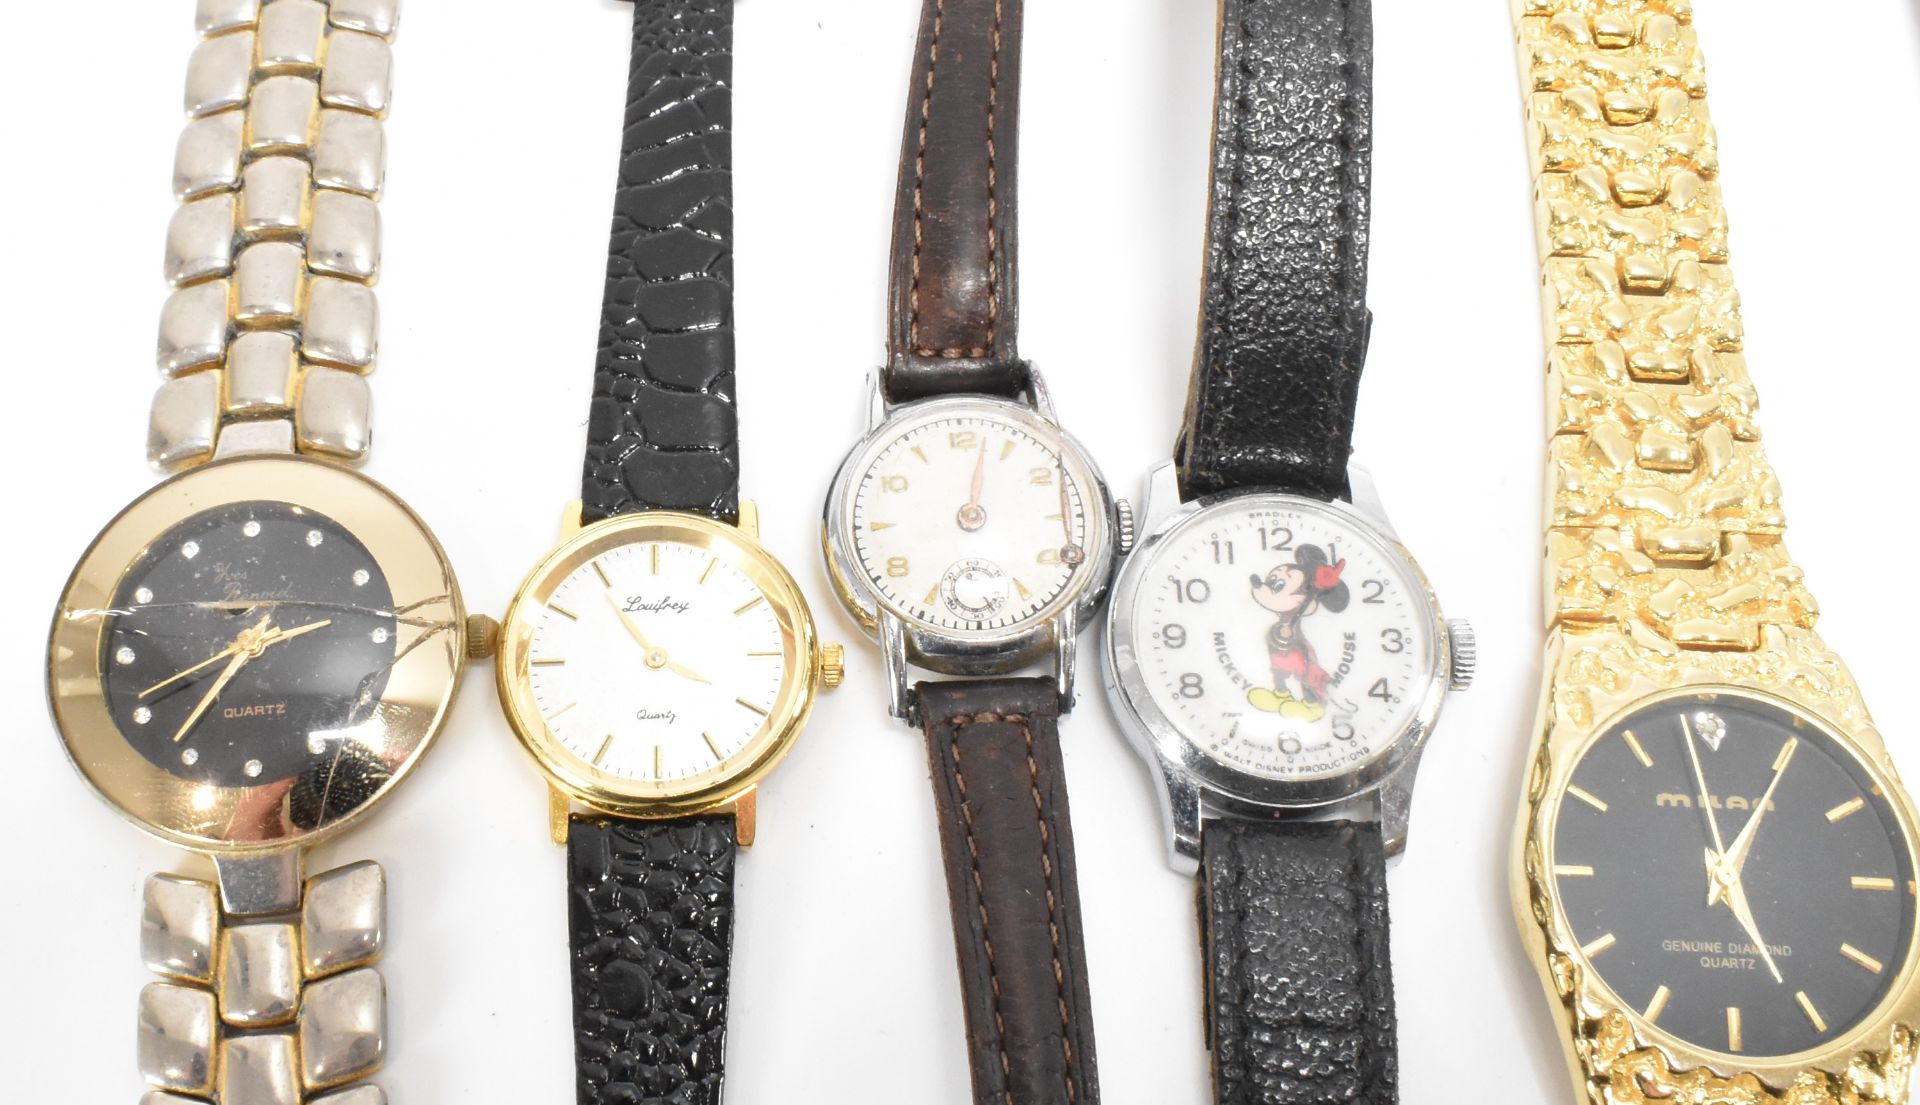 ASSORTMENT OF VARIOUS WRIST WATCHES - Image 7 of 9